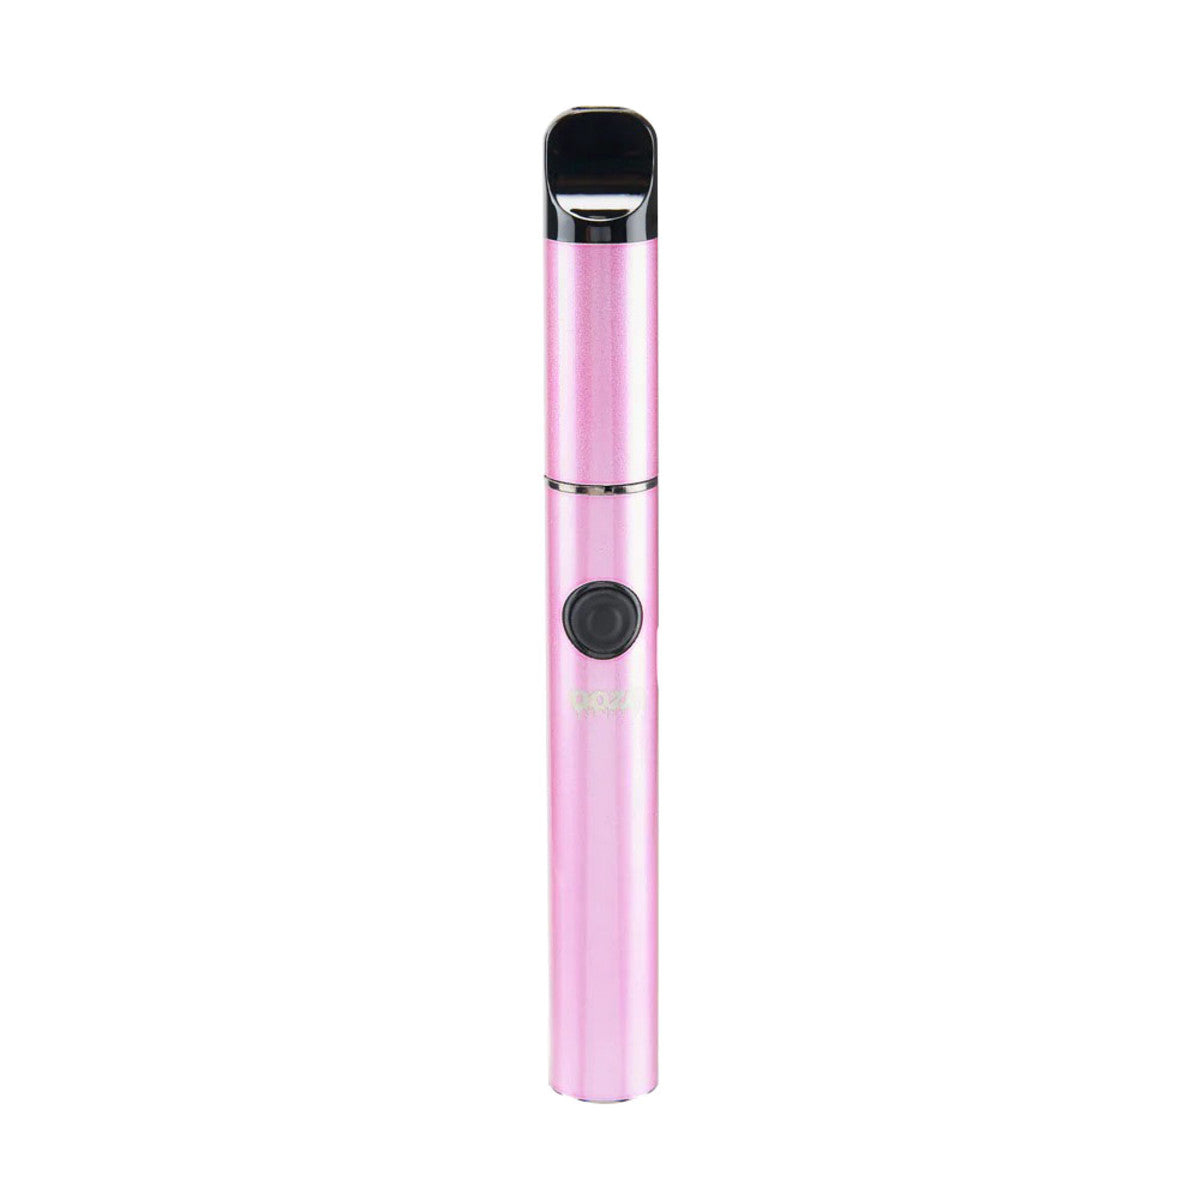 Ooze Signal Concentrate Wax Vaporizer Pen